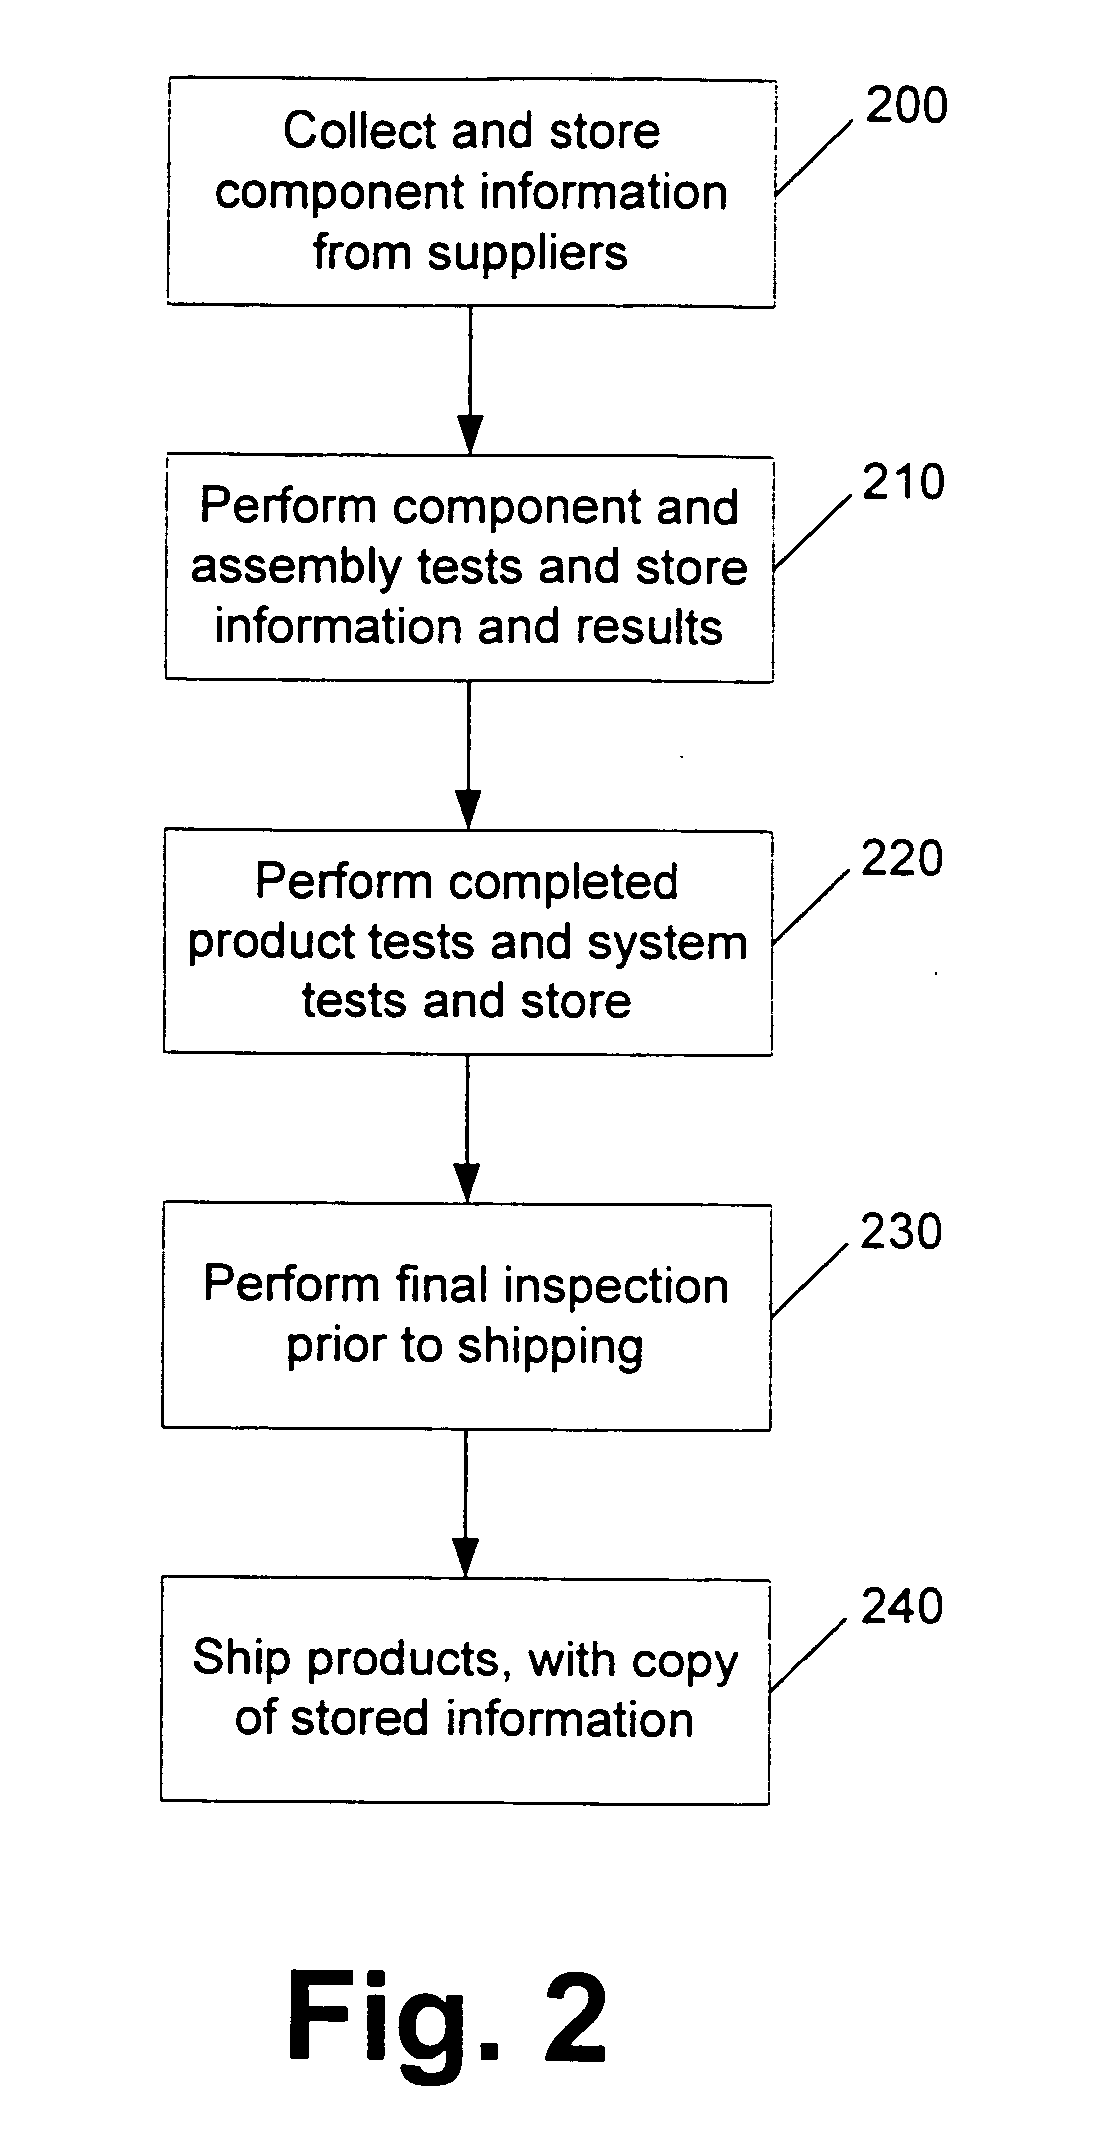 Incrementally accruing product and component quality and tracking data in the manufacturing of devices